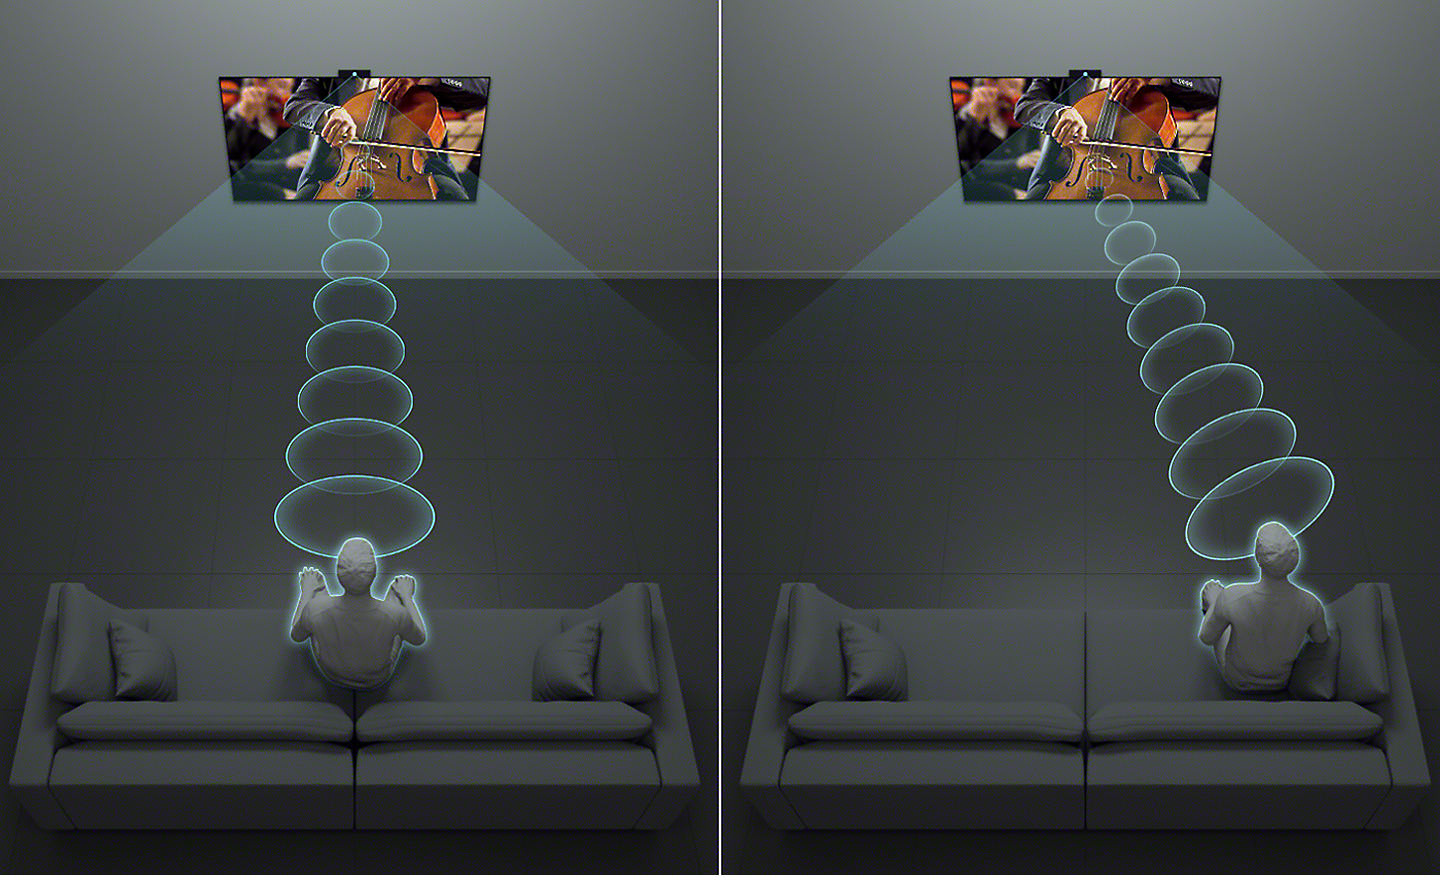 Split screen graphic showing someone watching TV from different positions: seated directly in front and seated to one side